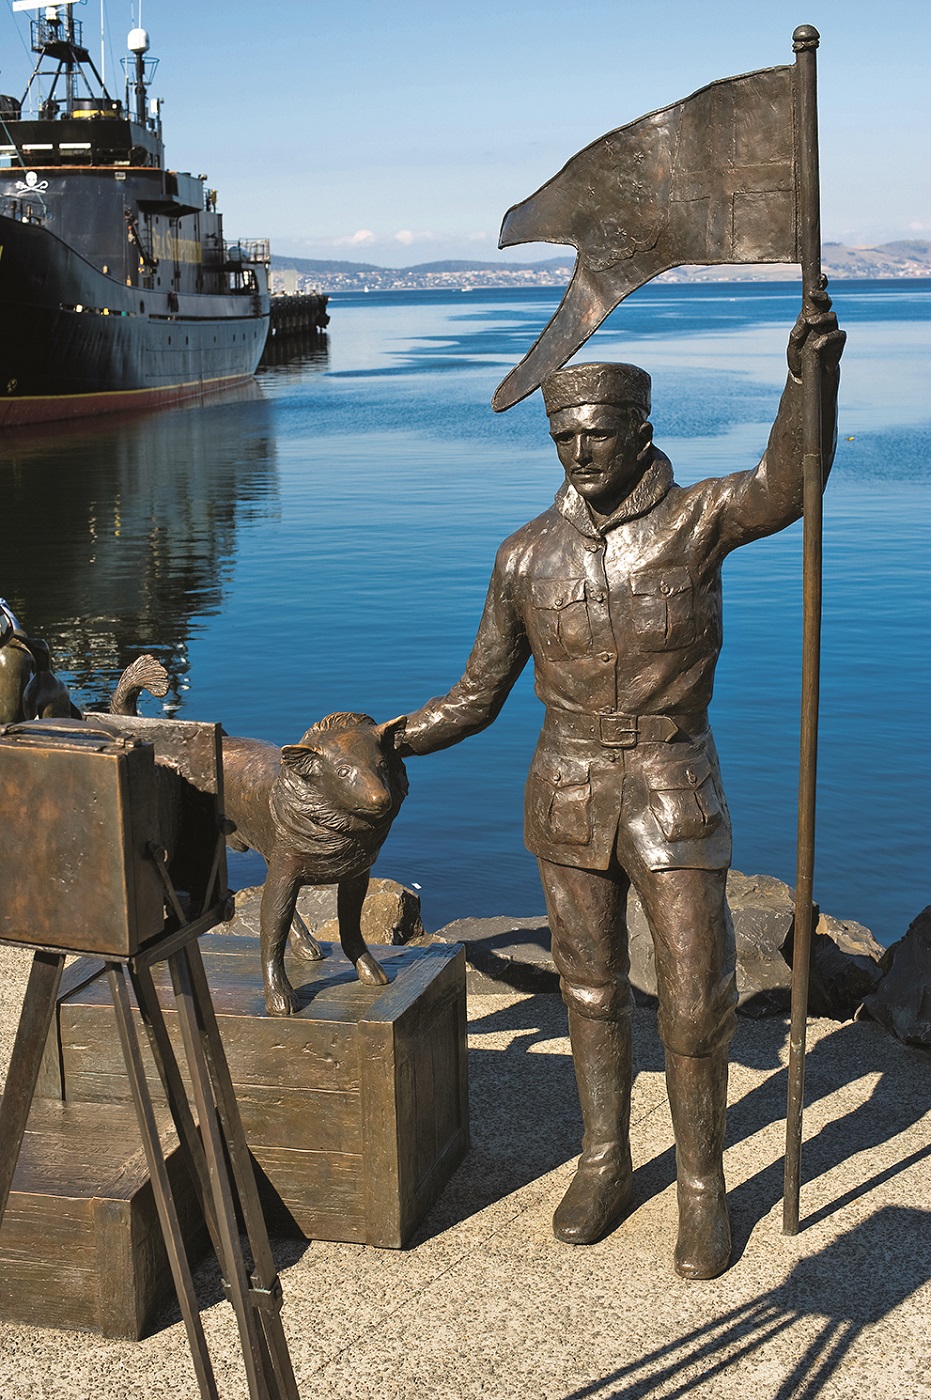 Heading South, sculpture on Victoria Dock, Hobart, Tasmania, TAS, Australia. (Photo by: Universal Images Group via Getty Images)